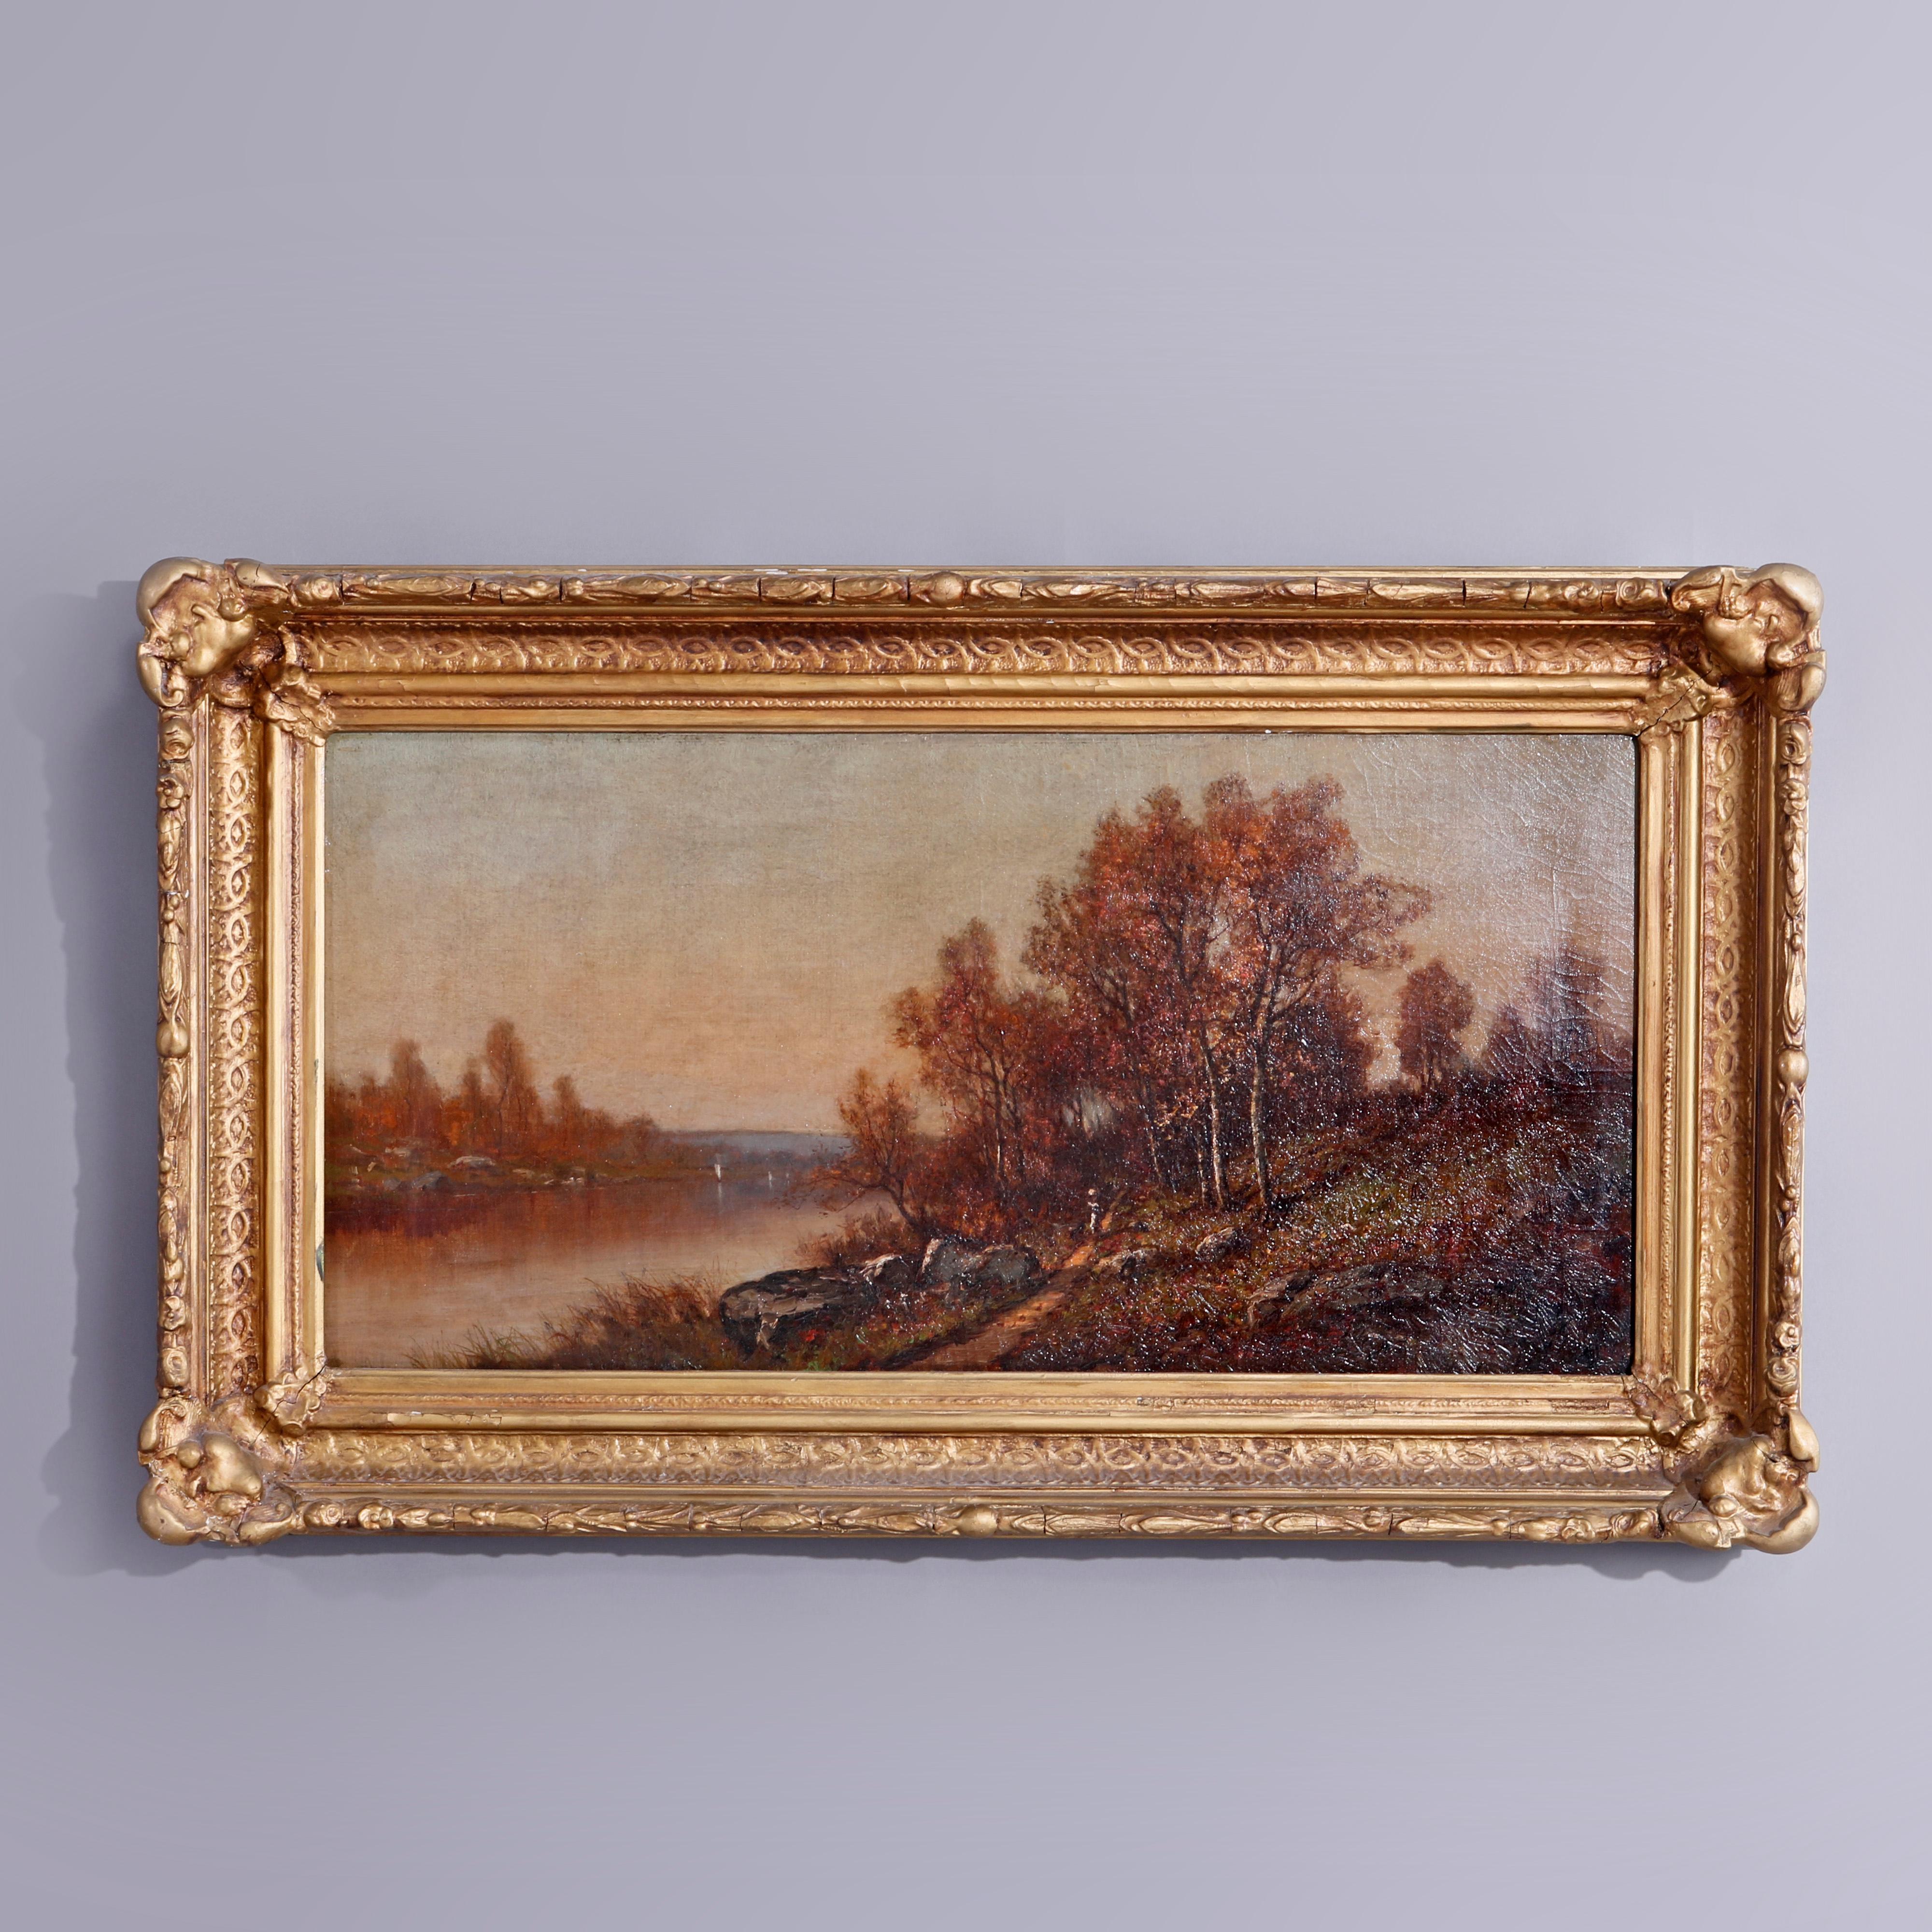 An antique landscape painting by Max Weyl offers oil on canvas 